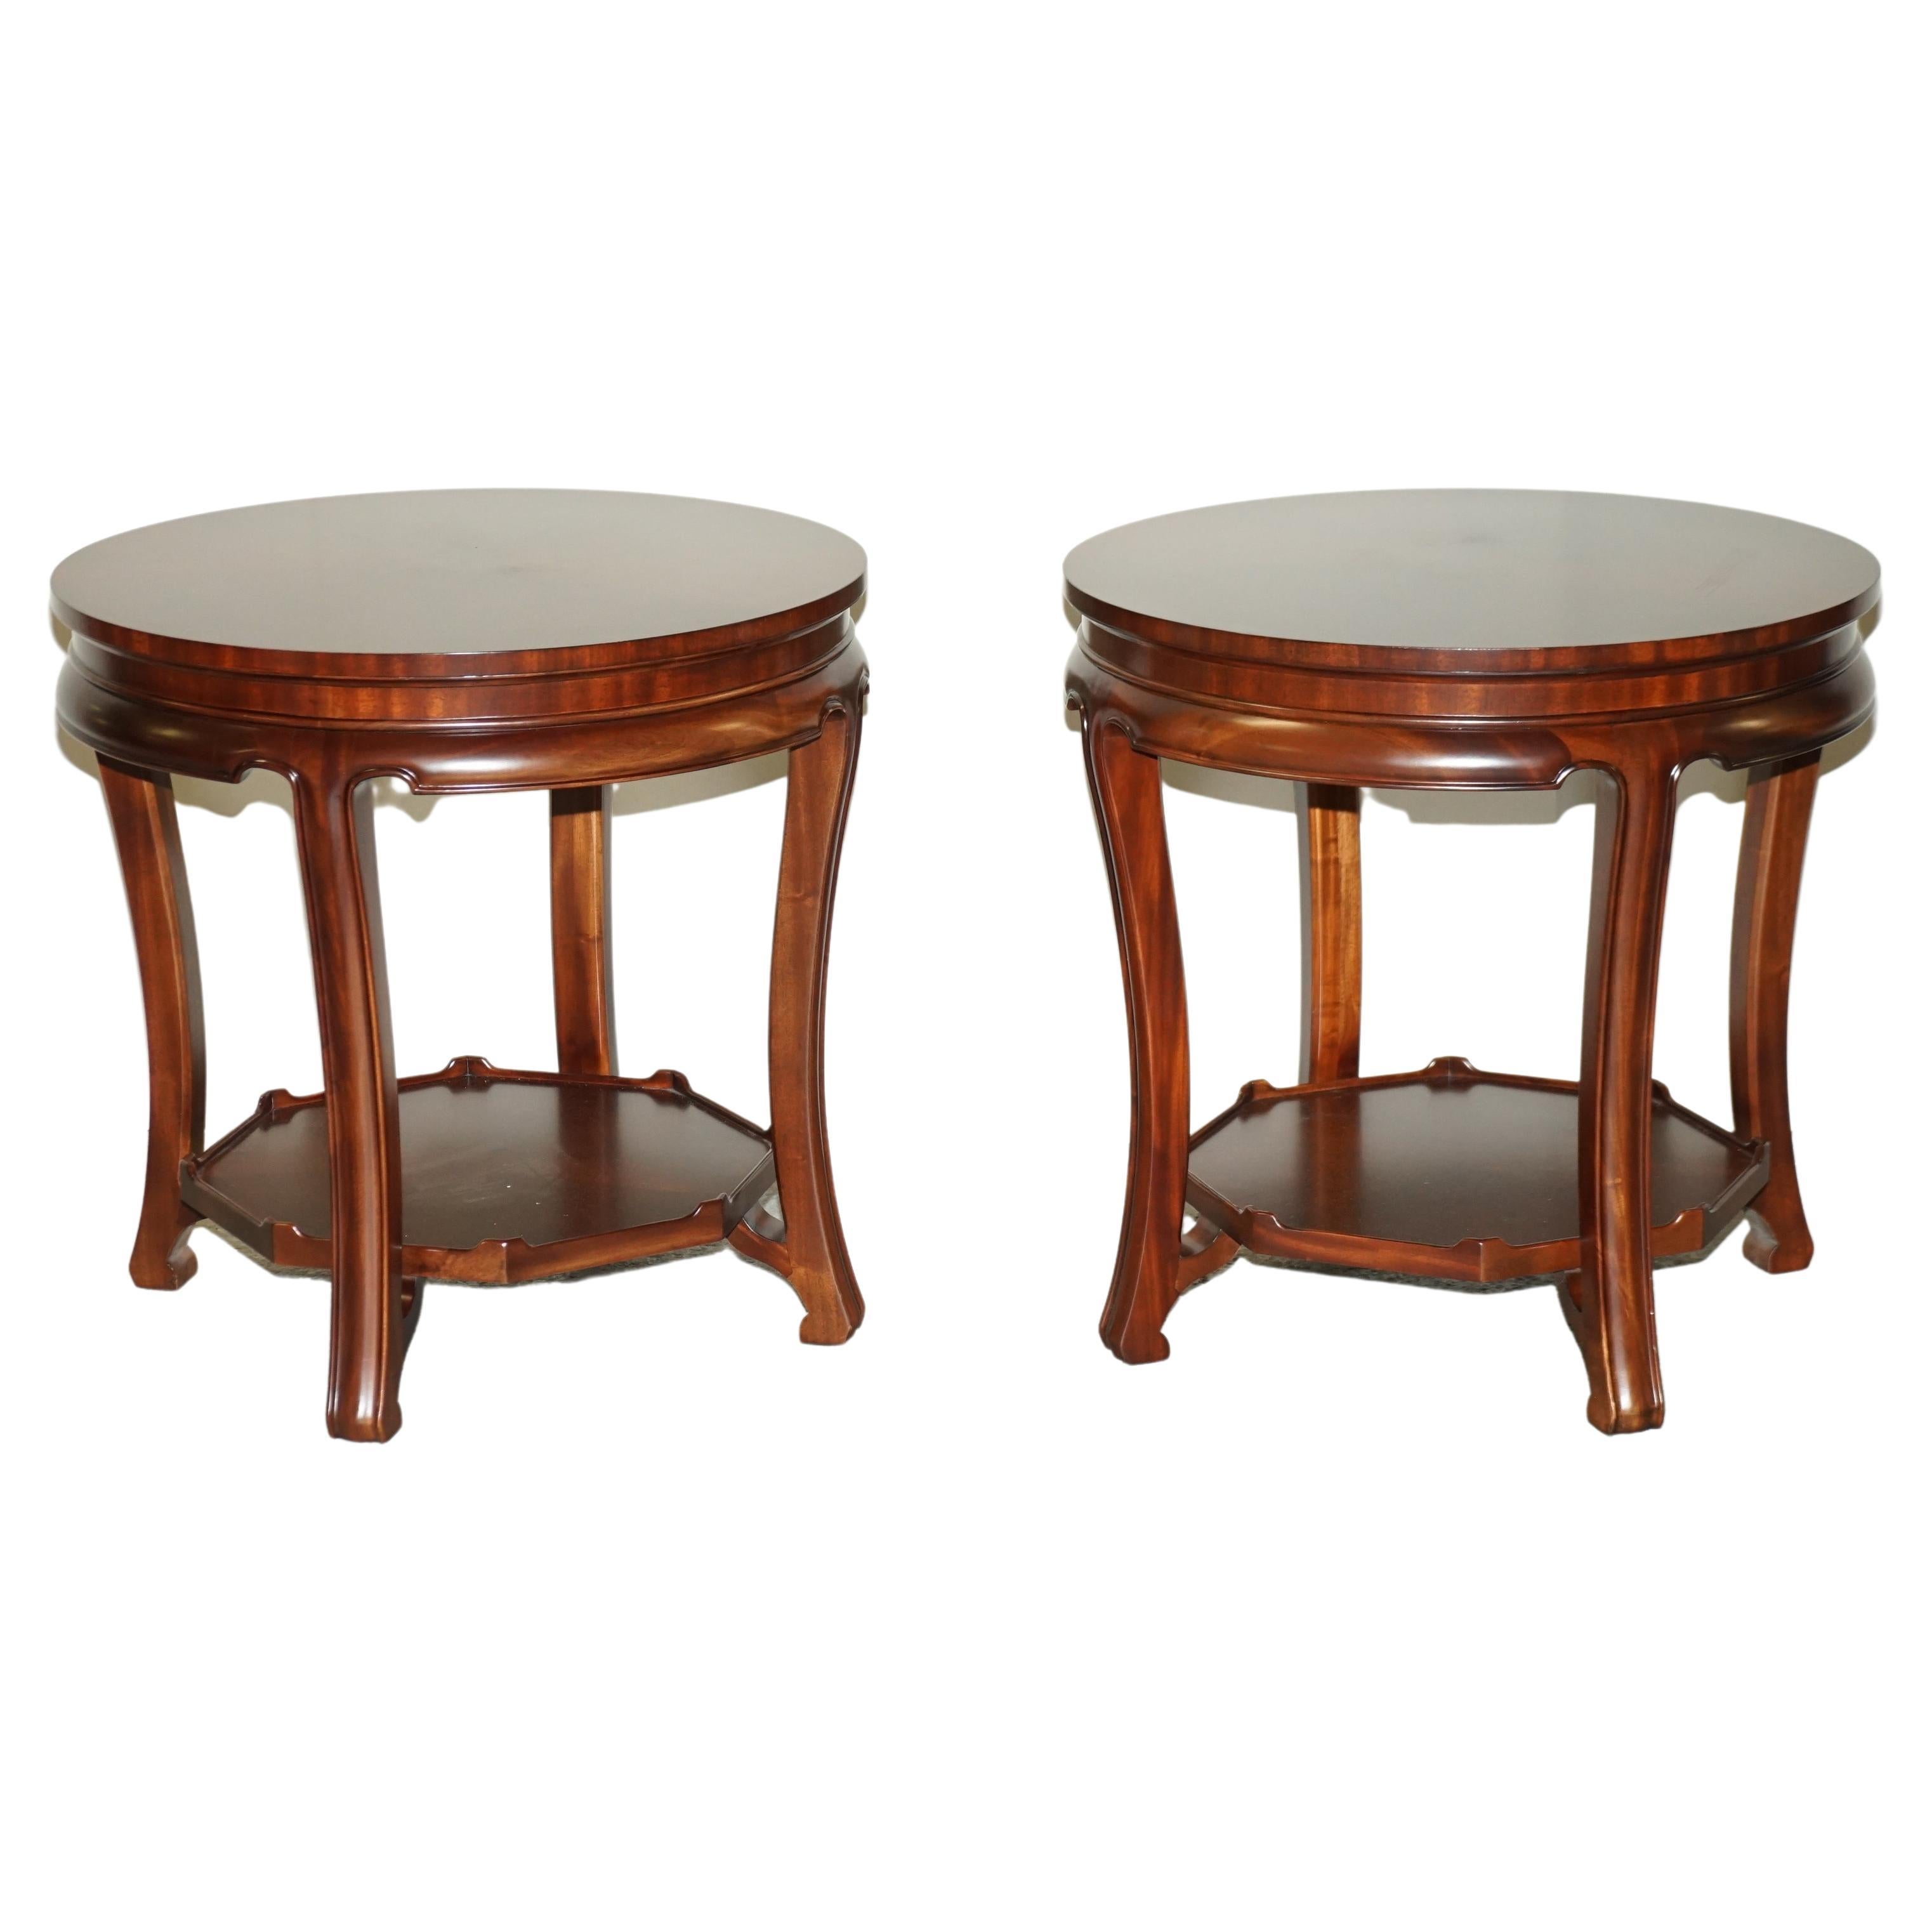 STUNNING PAIR OF RALPH LAUREN SIDE END LAMP WiNE TABLES LOVELY PATIN For Sale